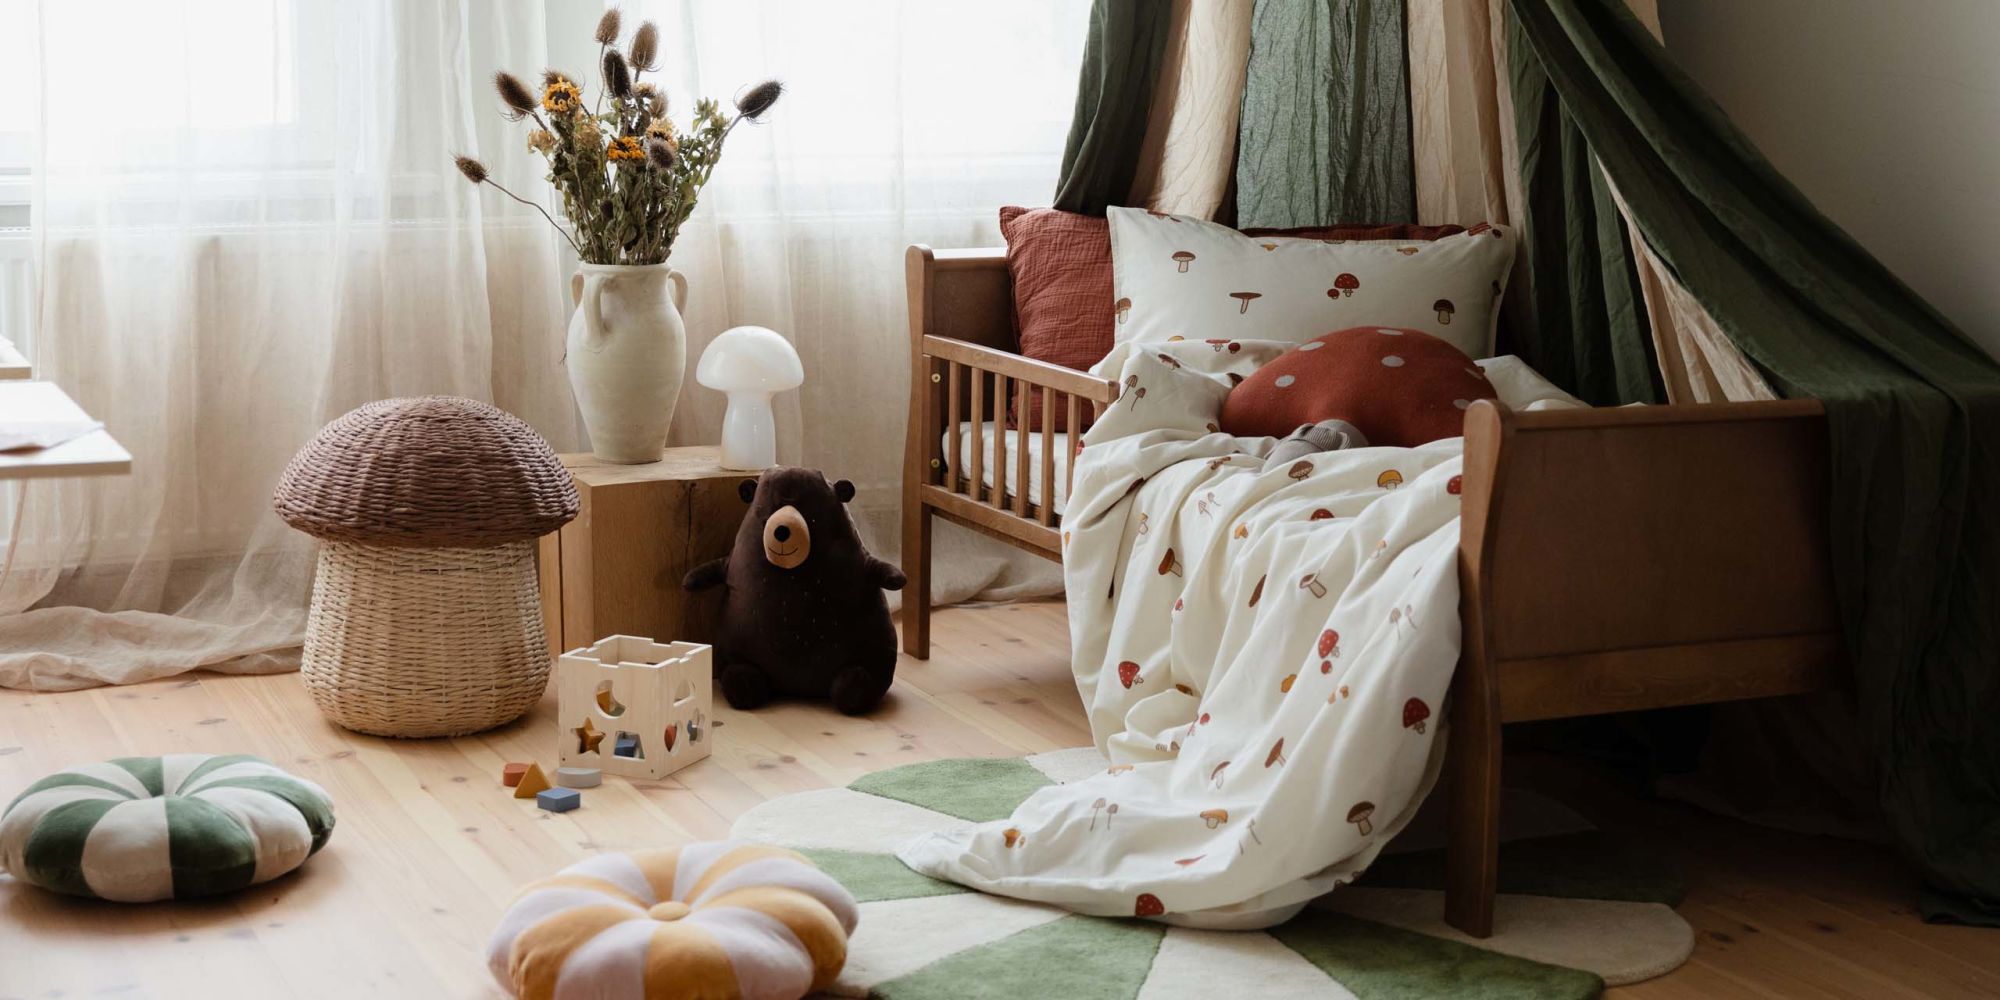 Room with kids furniture